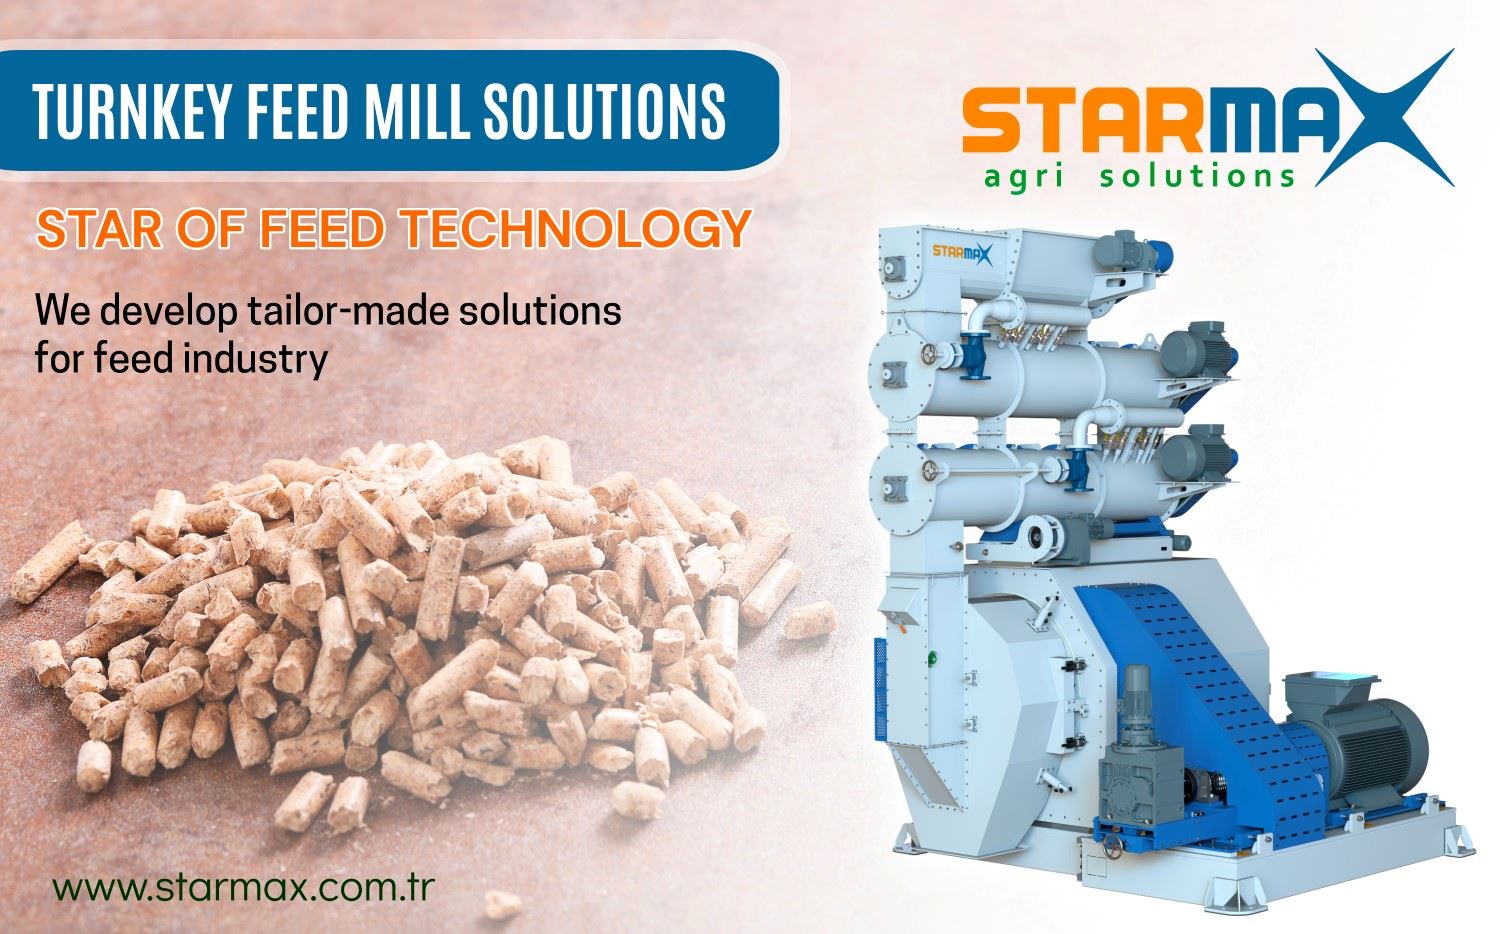 High quality feed mill engineering